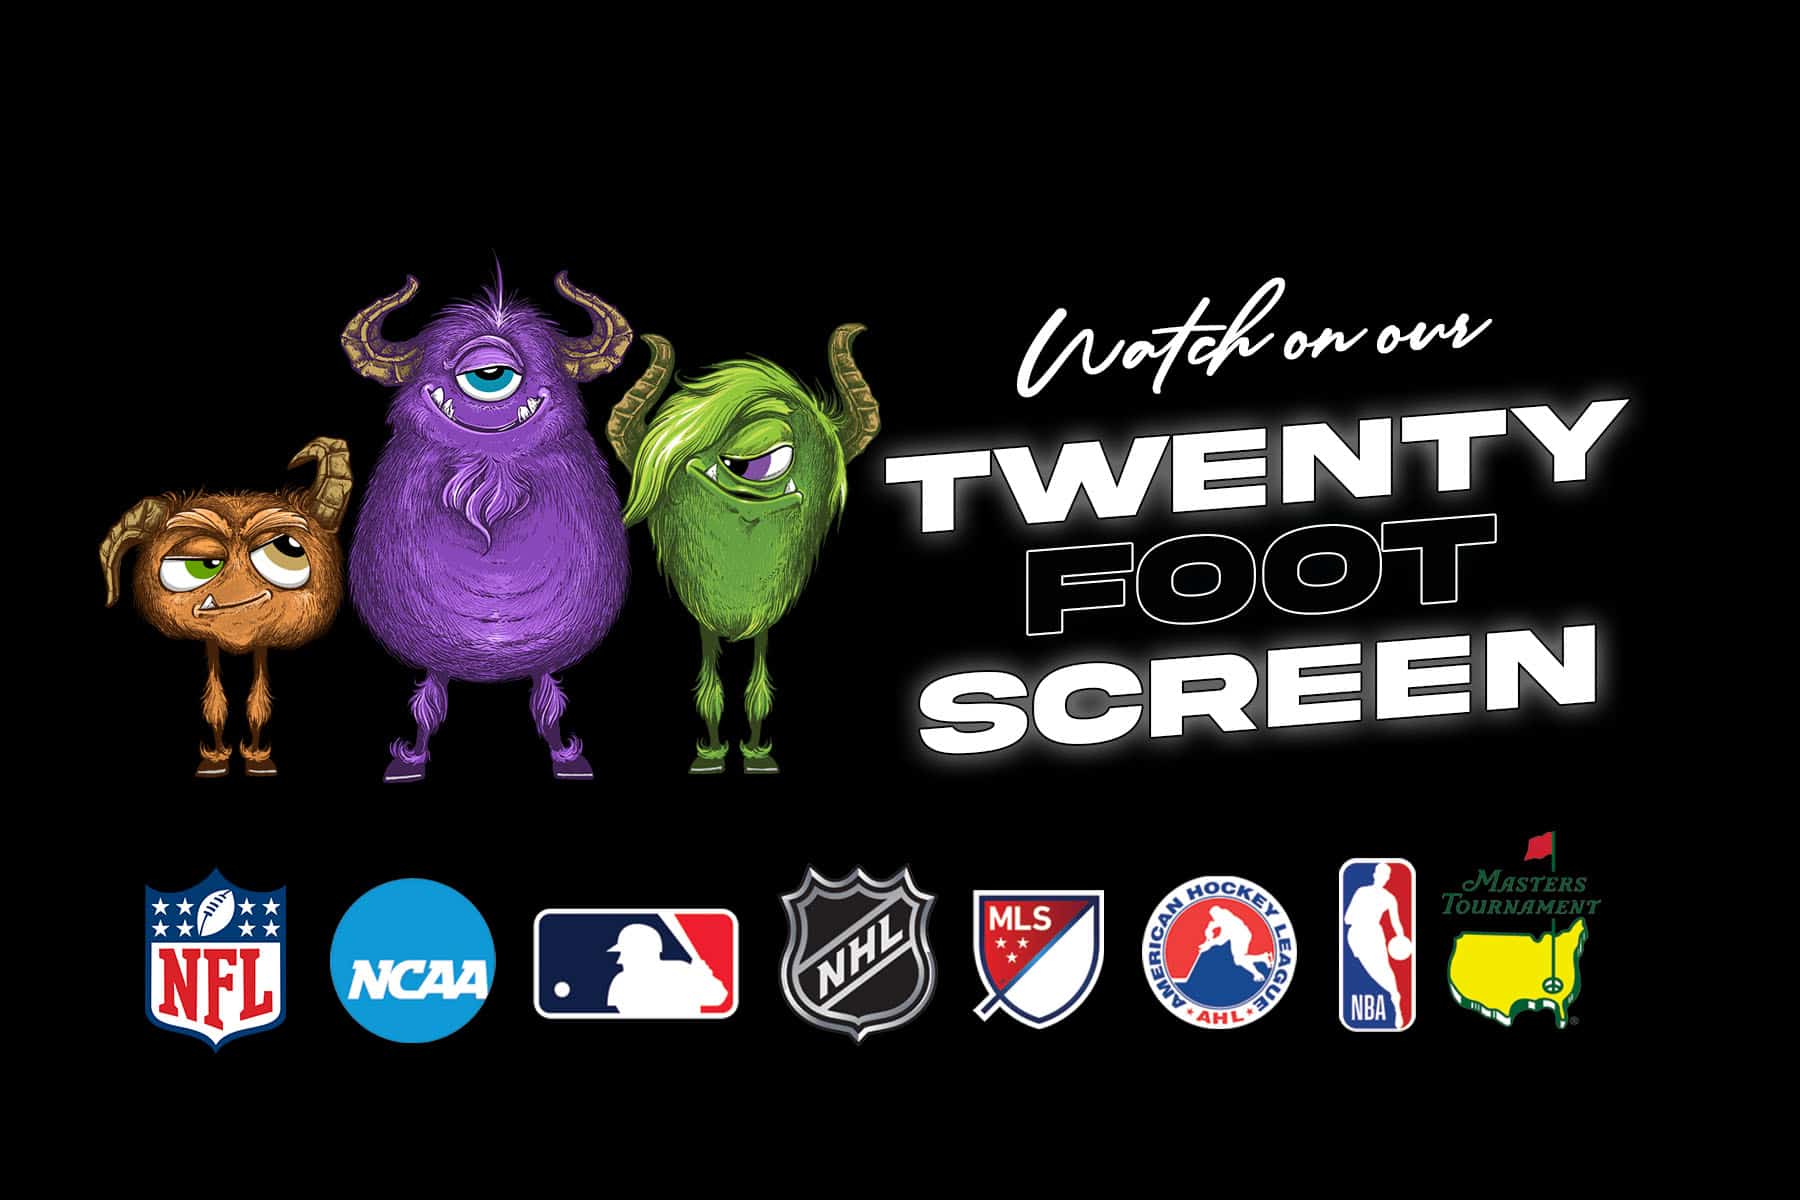 Watch All Sports on our 20-Foot Screen